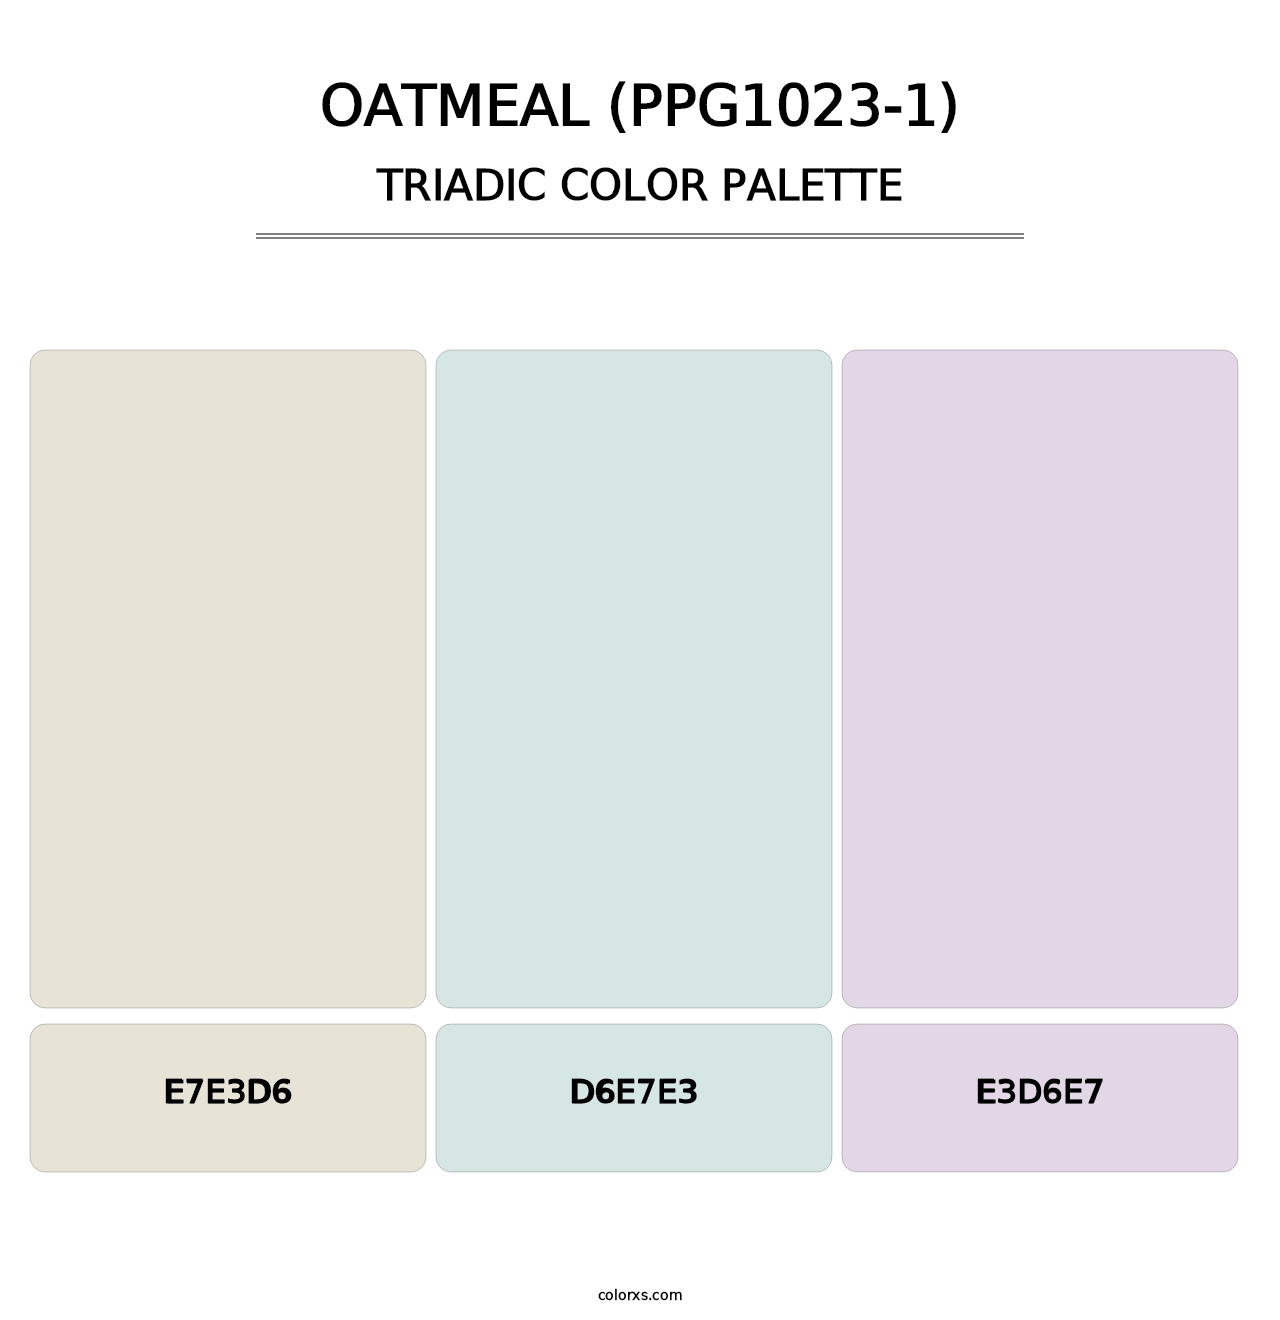 Oatmeal (PPG1023-1) - Triadic Color Palette